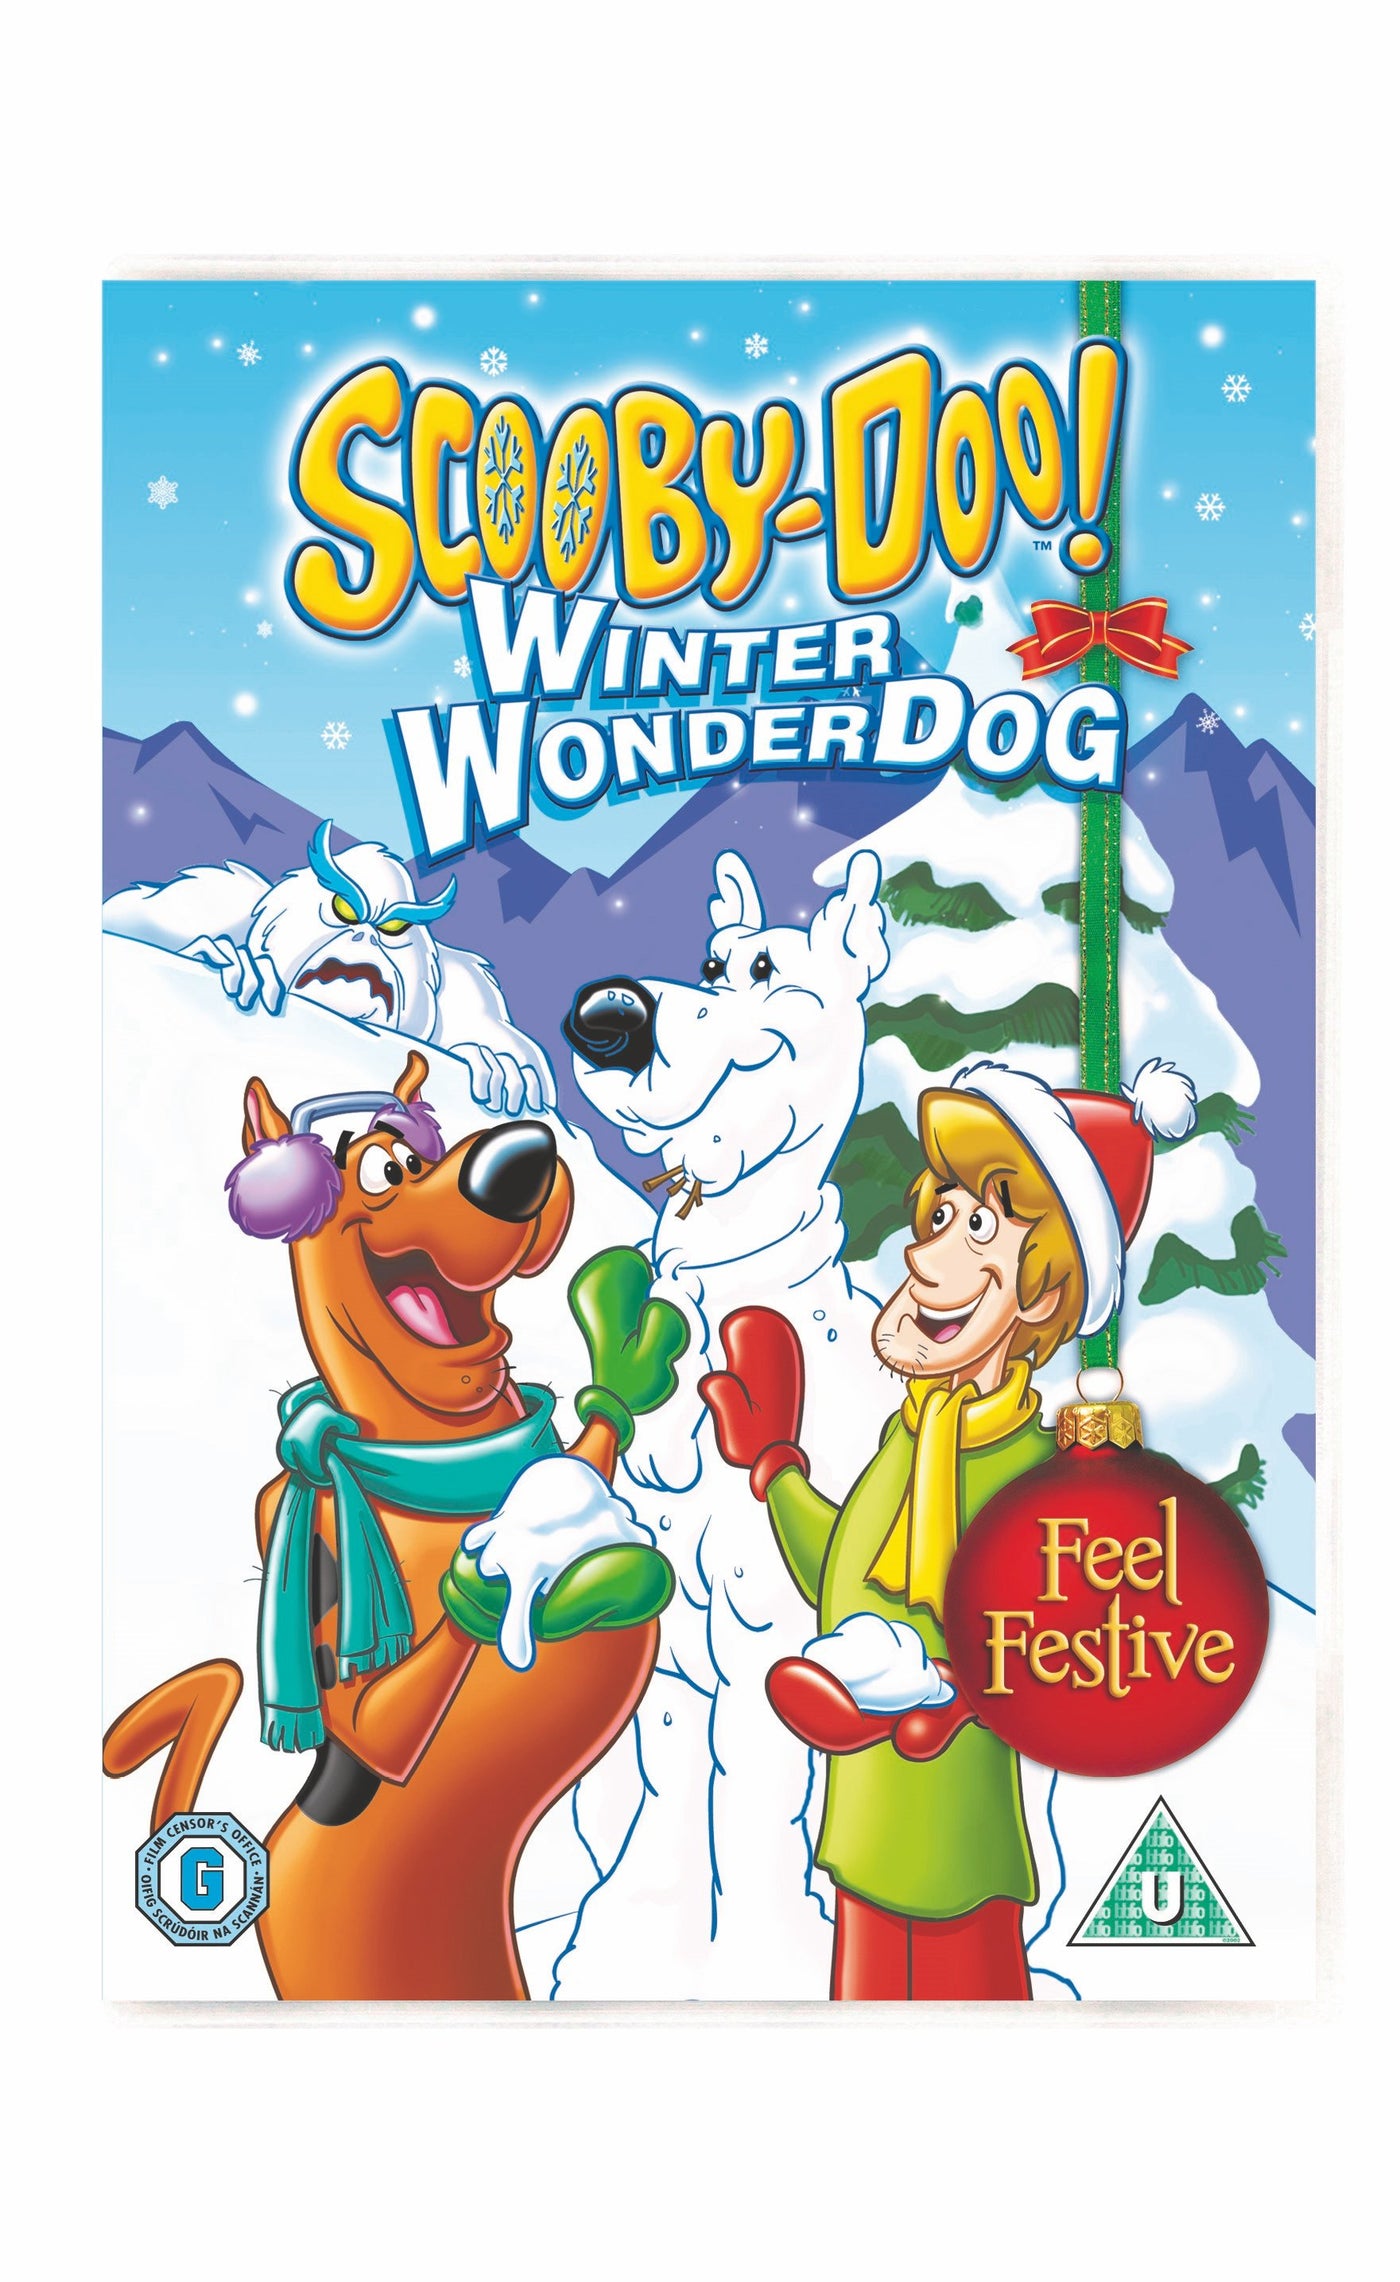 Scooby Doo And The Winter Wonderdog [2008] (DVD)